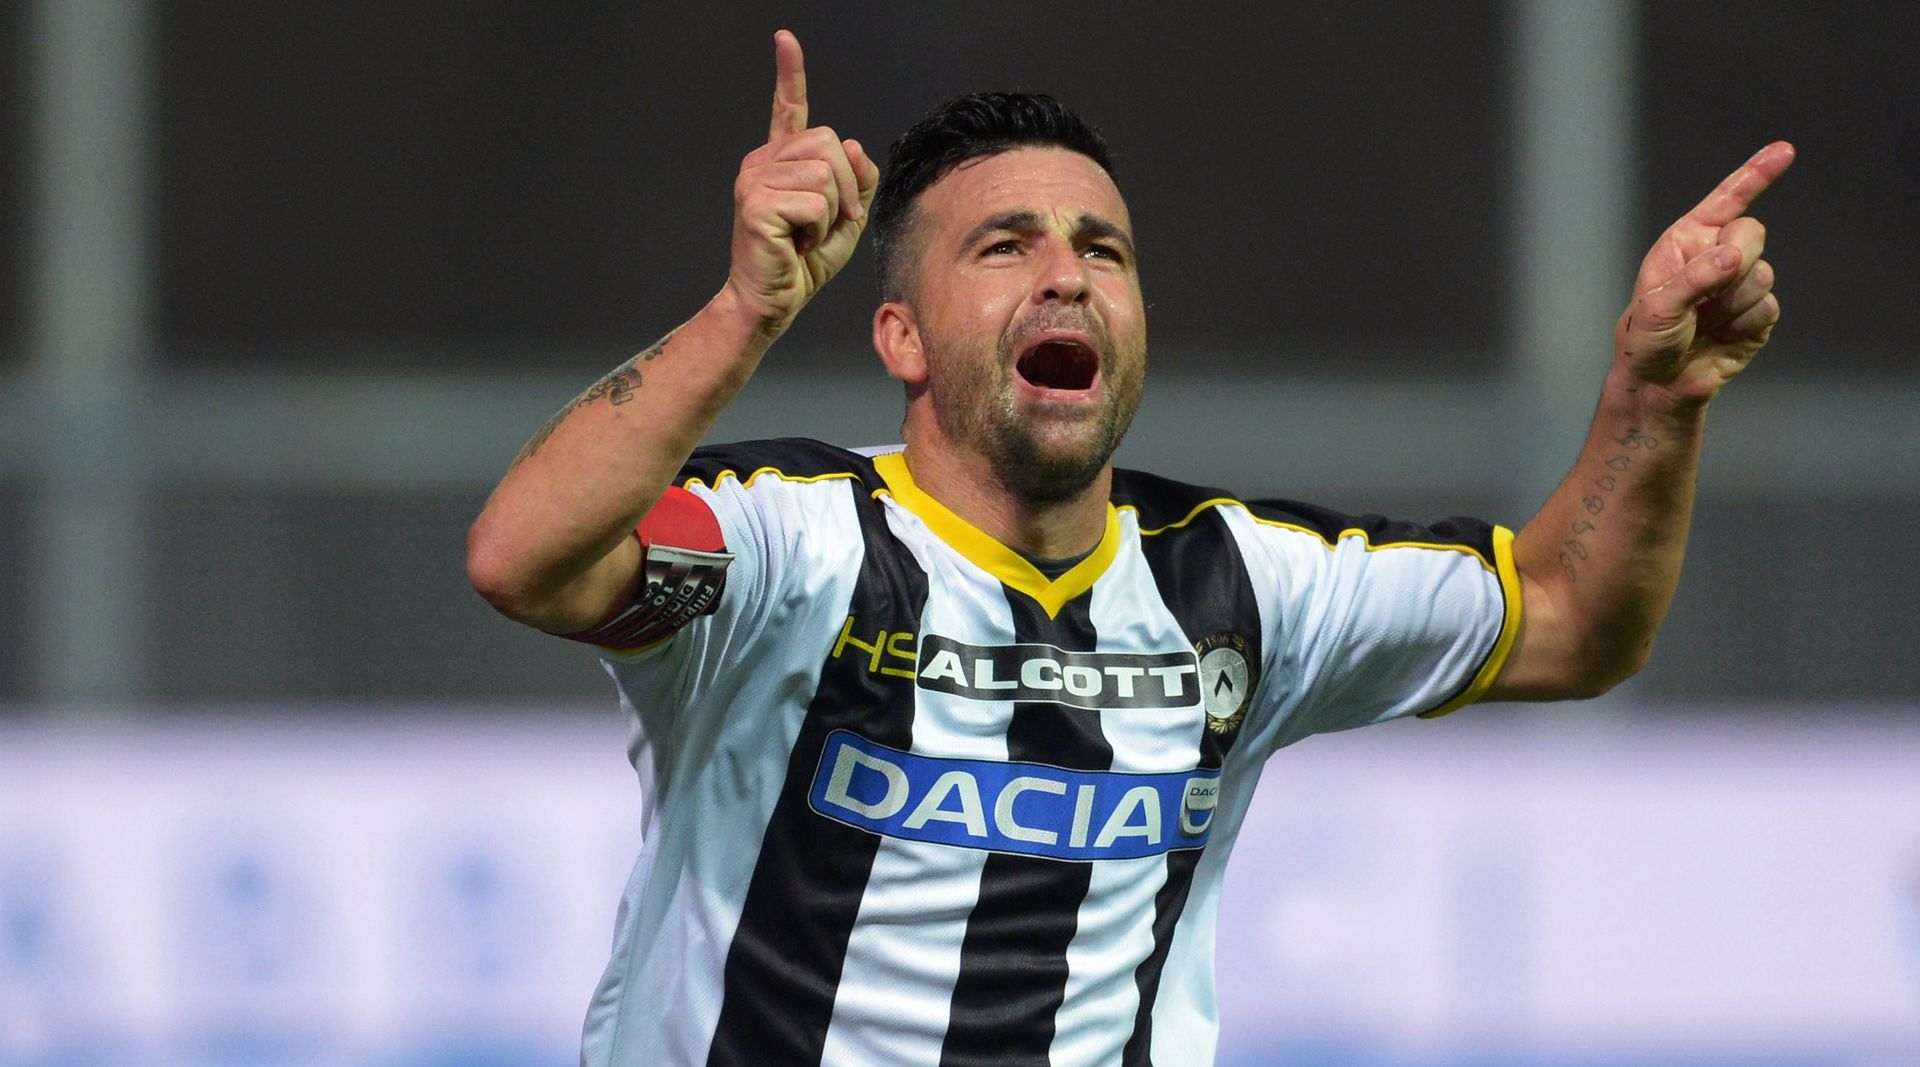 <p>                     In each Serie A season from 2009/10 to 2011/12, Antonio Di Natale scored at least 23 goals for Udinese, collecting the <em>Capocannoniere</em> in 2010 and 2011.                   </p>                                      <p>                     Voted Serie A Italian Footballer of the Year in 2010 and named in three consecutive Teams of the Year between 2011 and 2013, the 42-cap Italy international was unfortunate never to get a move to a top club.                   </p>